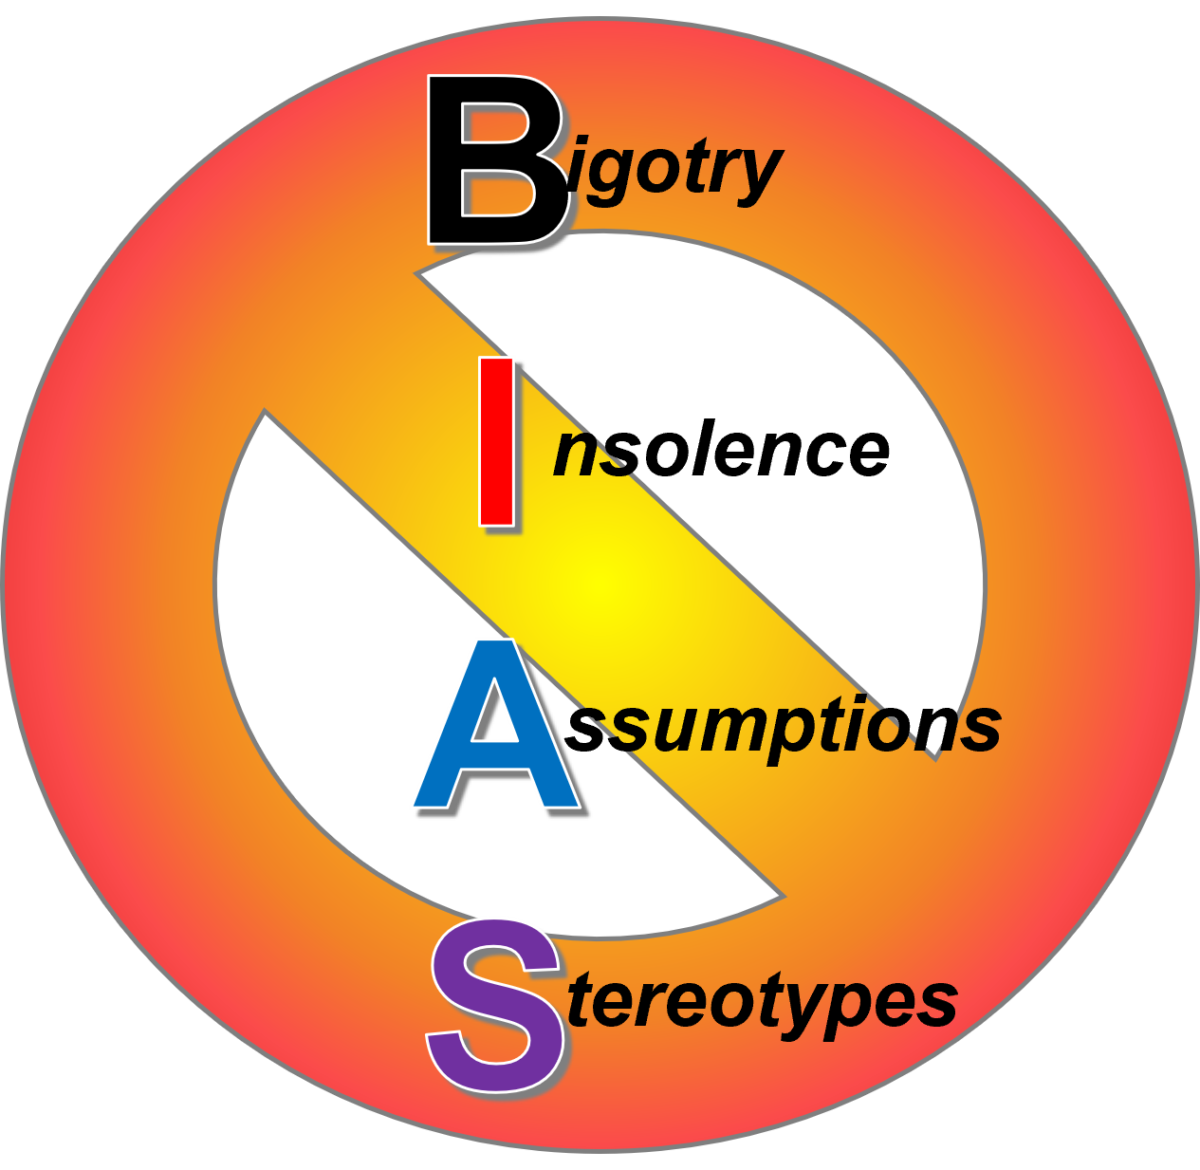 Image of BIAS with associated words of Bigotry, Insolence, Assumptions, Stereotypes.